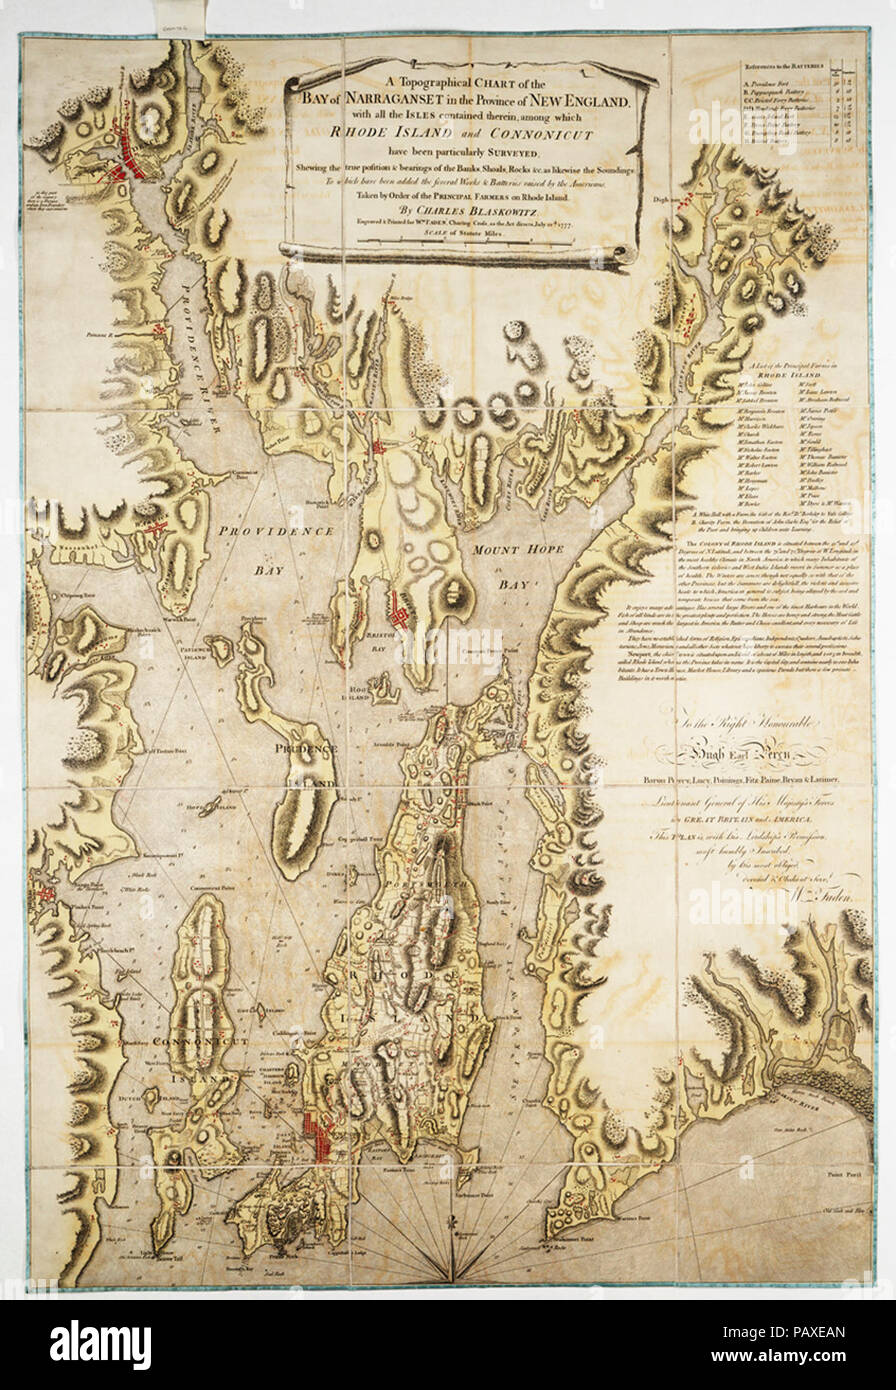 A topographical chart of the Bay of Narraganset in the province of New England with all the isles contained therein, among which Rhode Island and Connonicut have been particularly surveyed Stock Photo